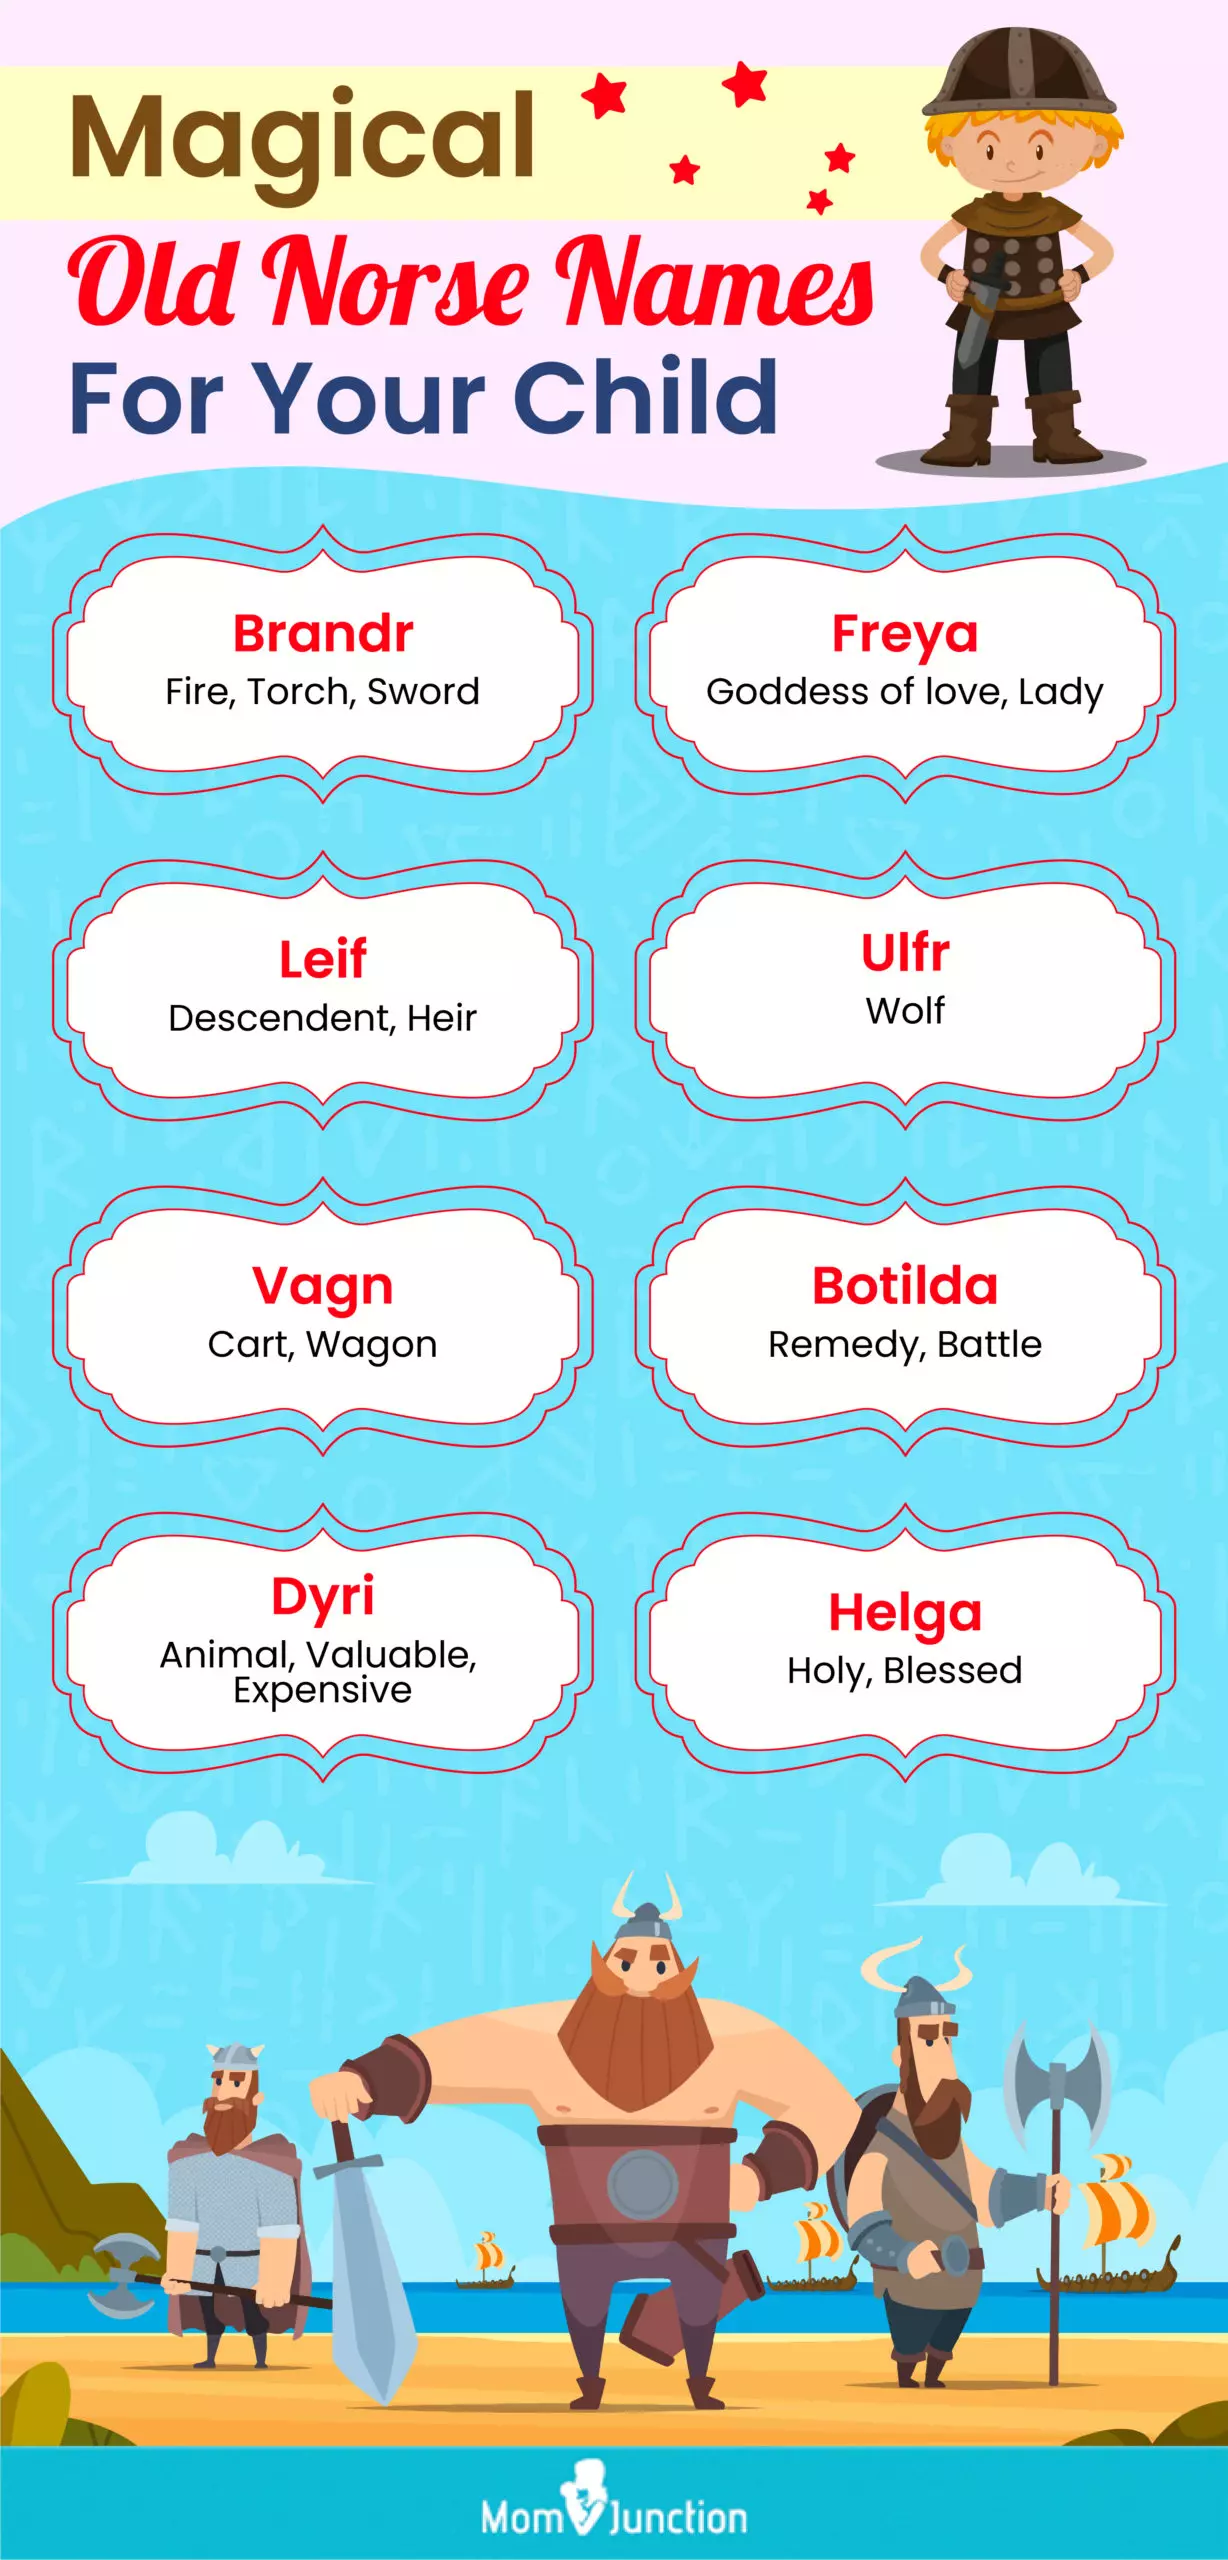 magical old norse names for your child (infographic)